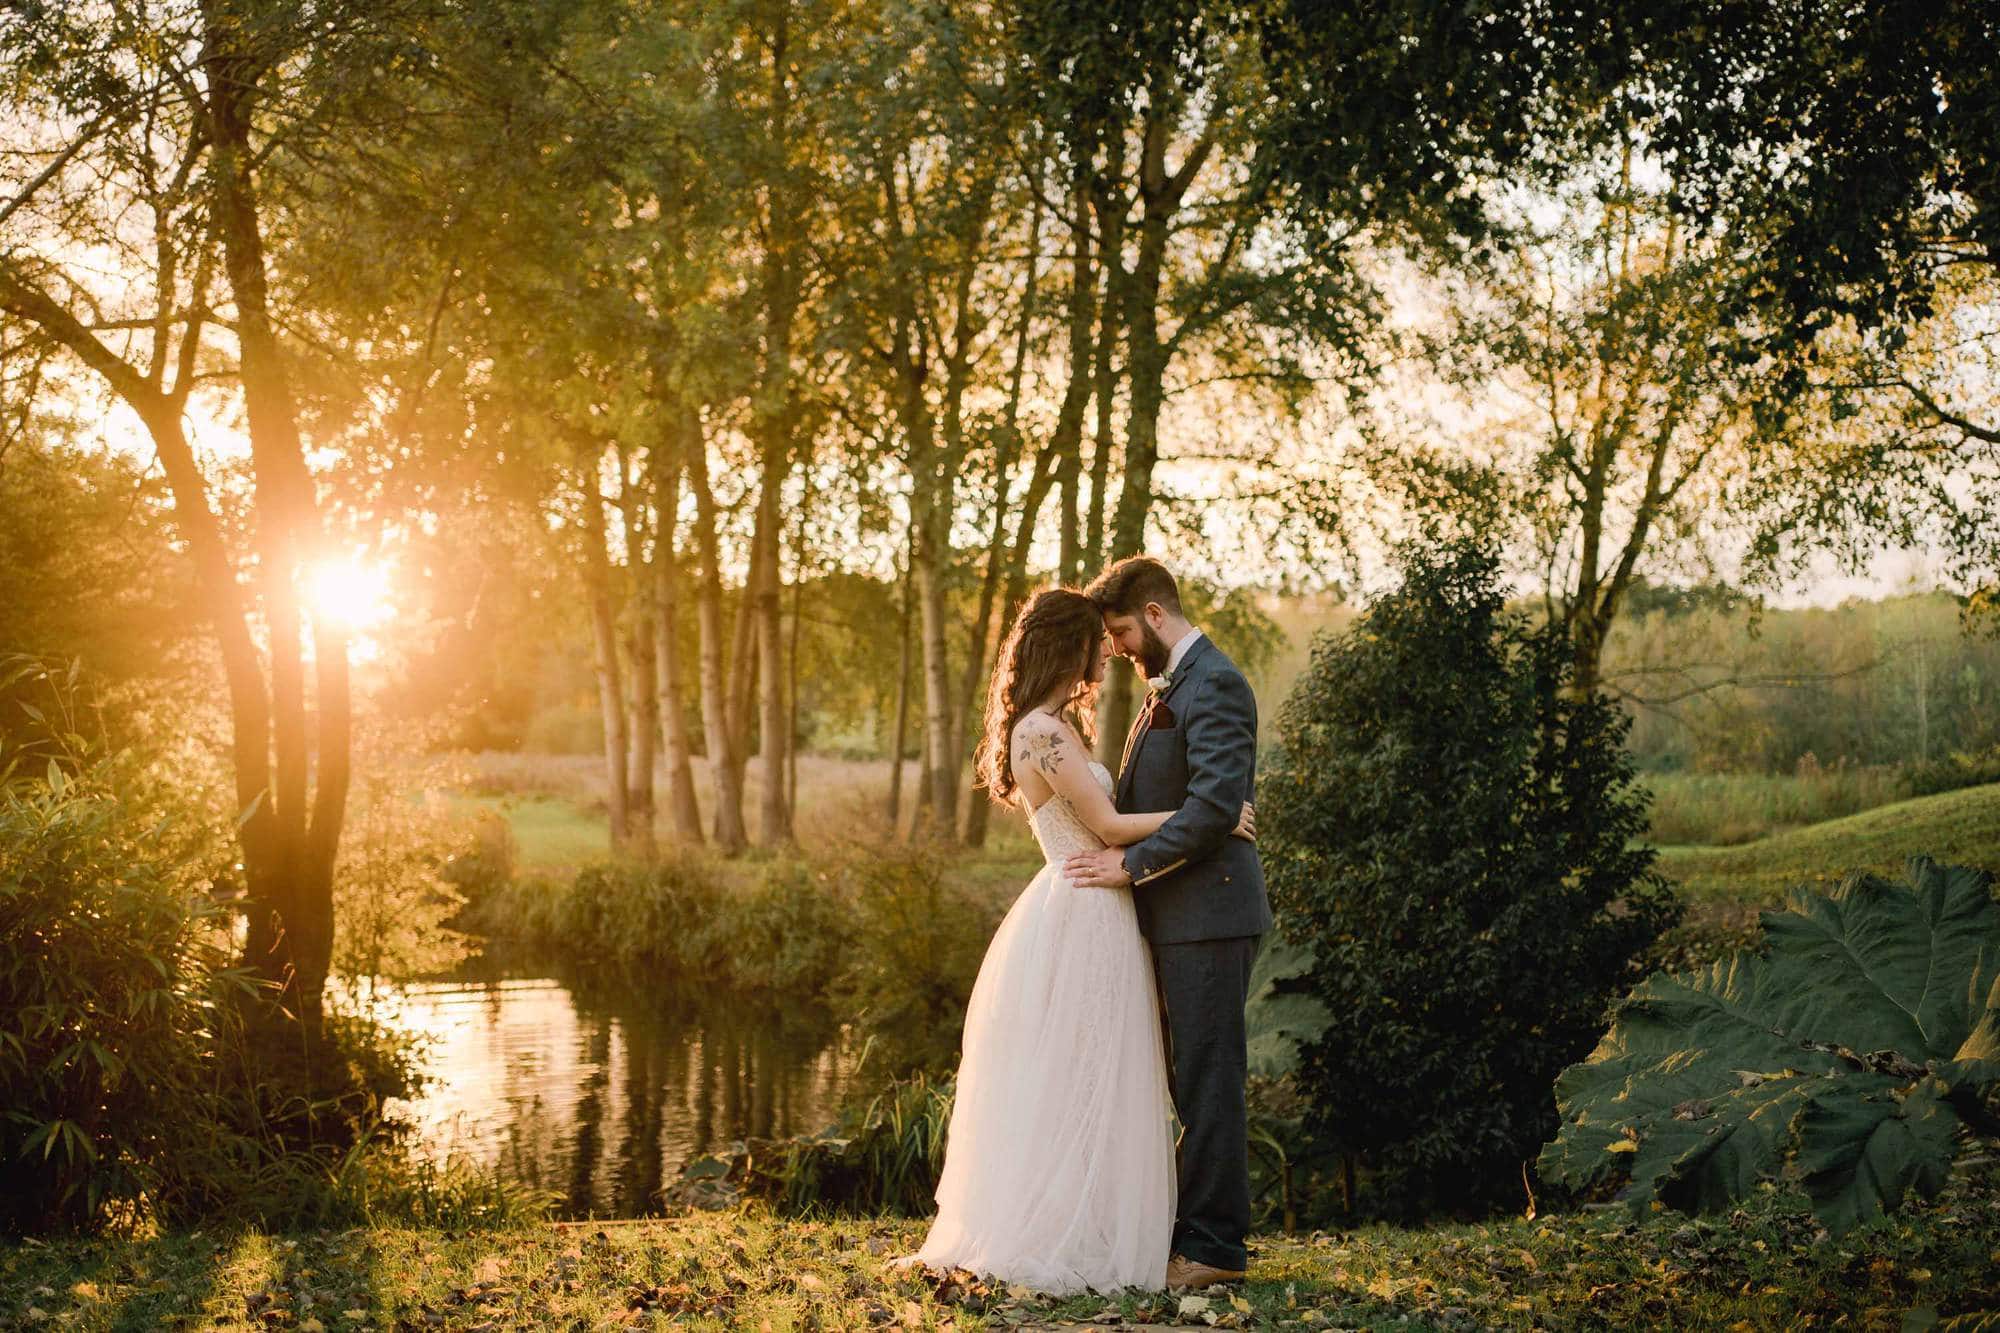 A beautiful sunset at a wedding barn in Winchester, Hampshire.